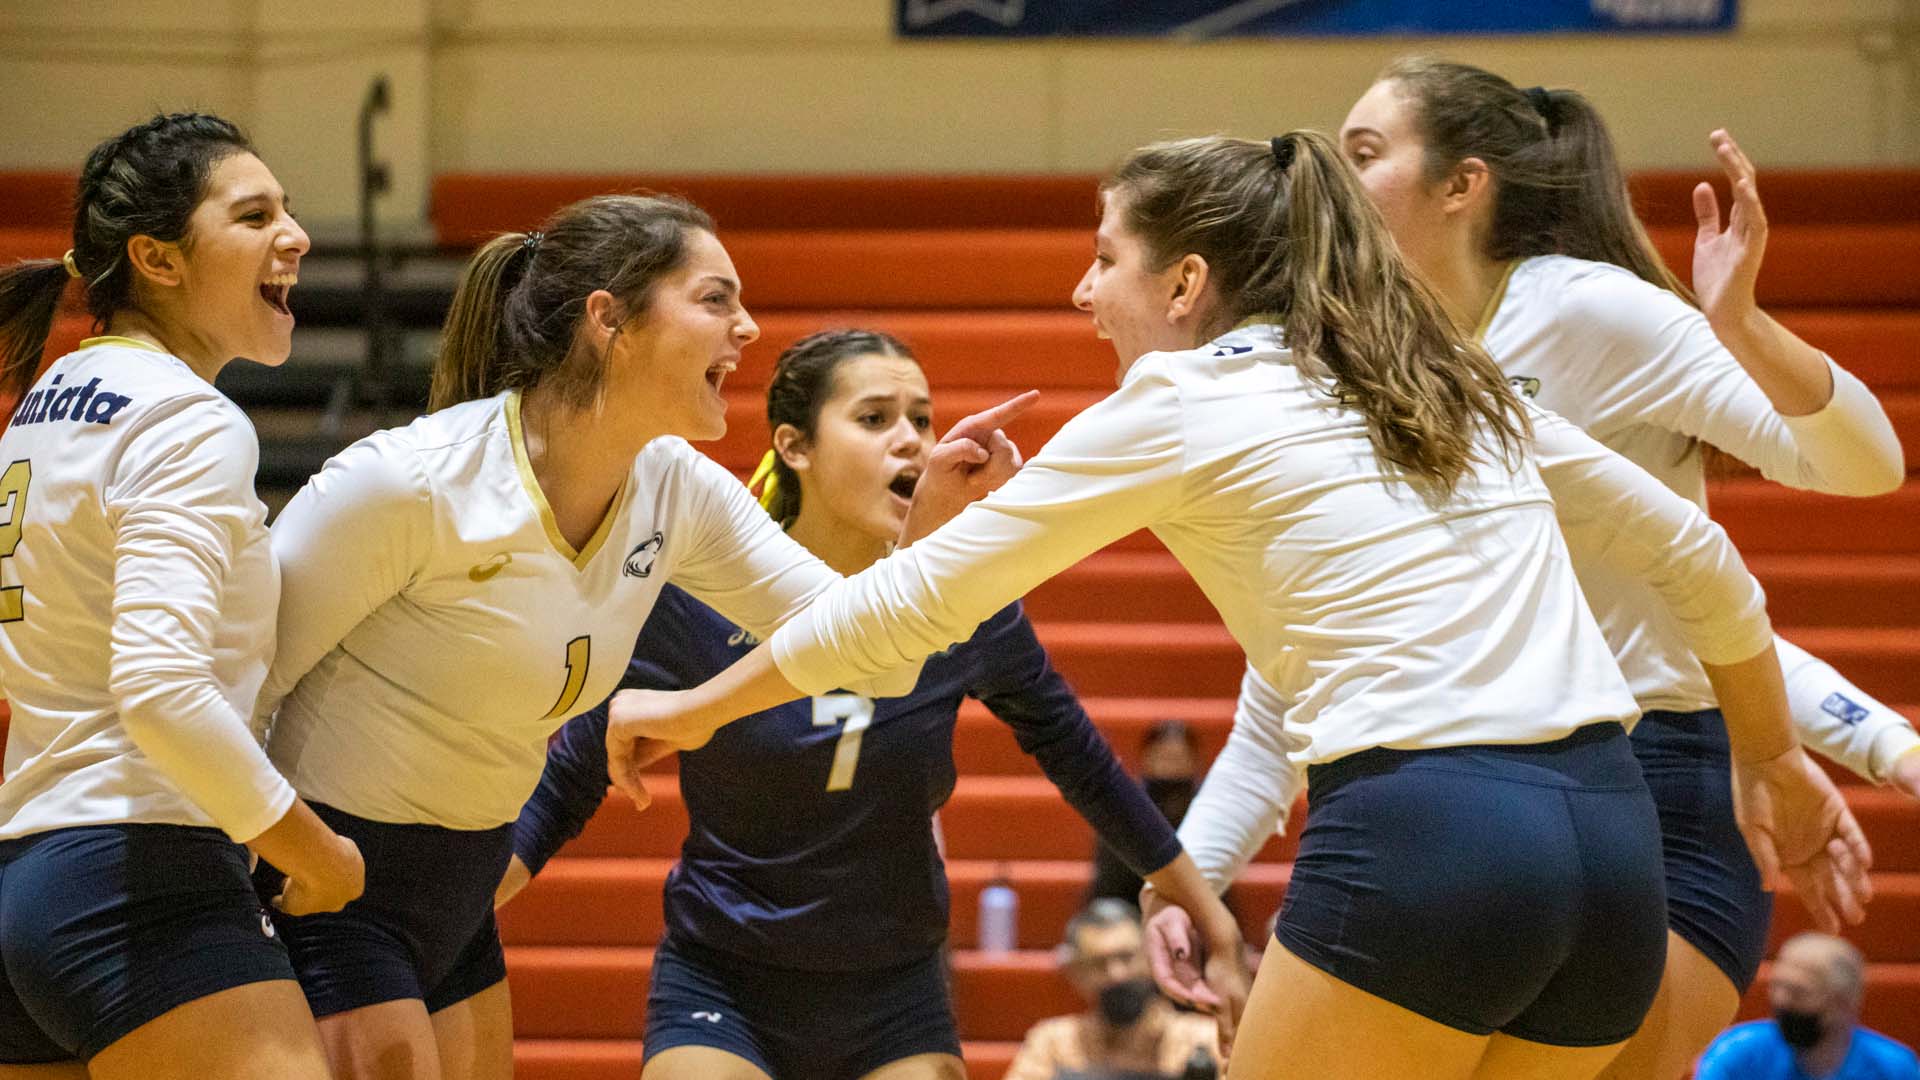 Women's Volleyball Outlasts Babson, Advances to Regional Final